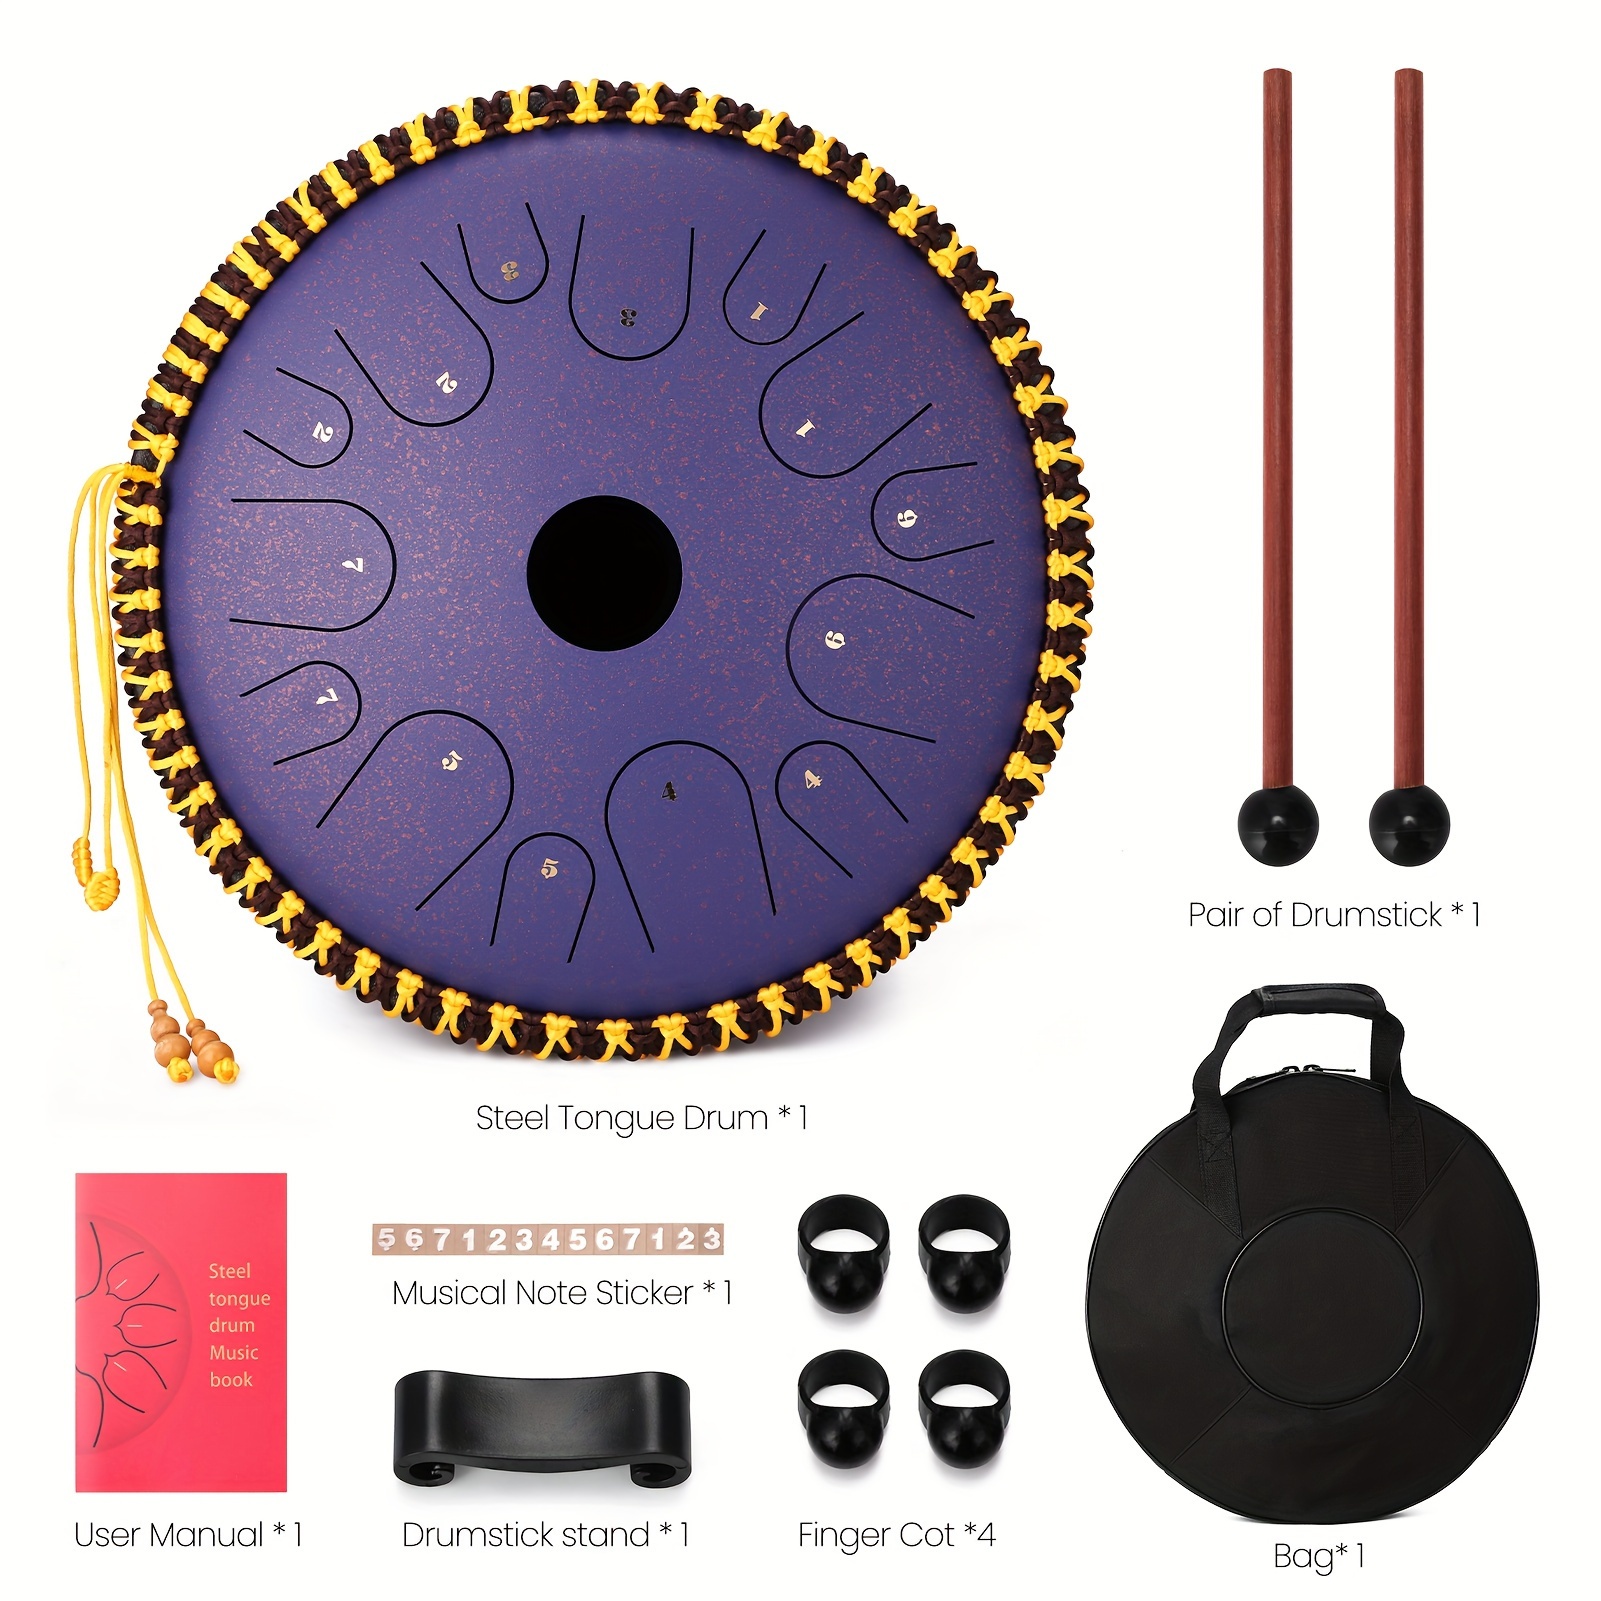 

Gecheer 14 Inch 14-tone Carbon Steel Tongue Drum C-key Hand Pan Drums With Drumsticks Percussion Musical Instruments